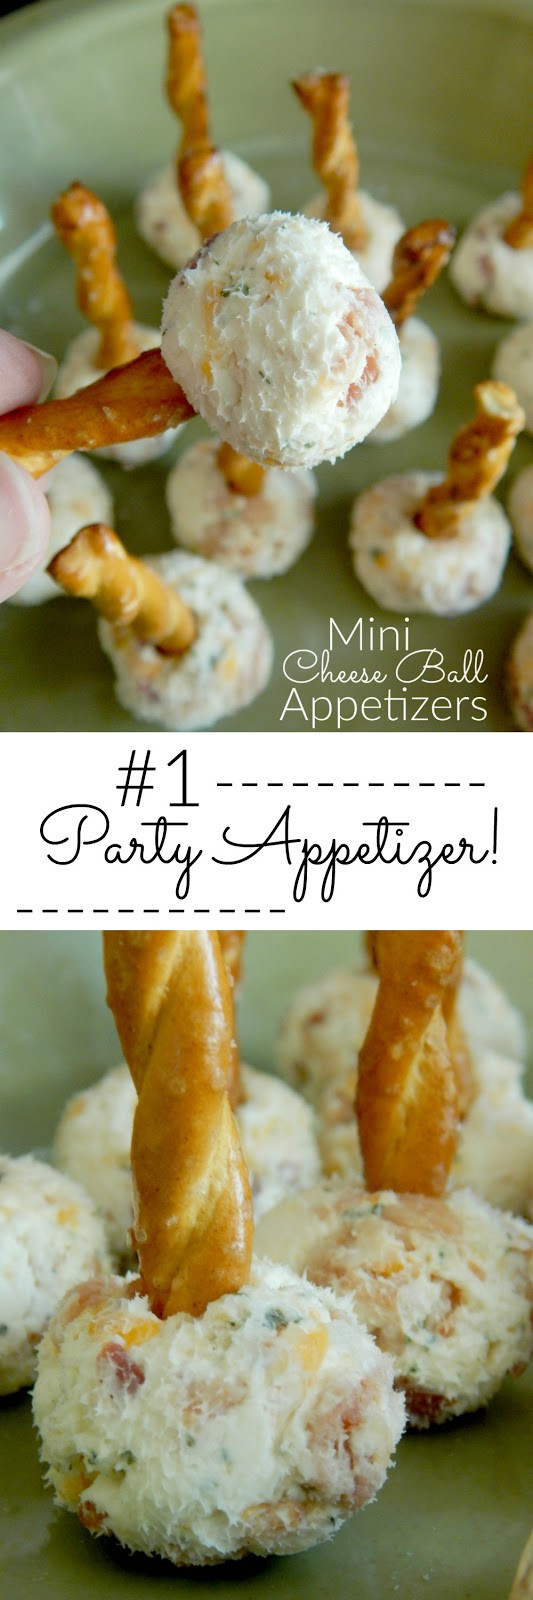 Mini Cheese Ball Appetizers
 Ally s Sweet and Savory Eats Mini Cheese Ball Appetizers